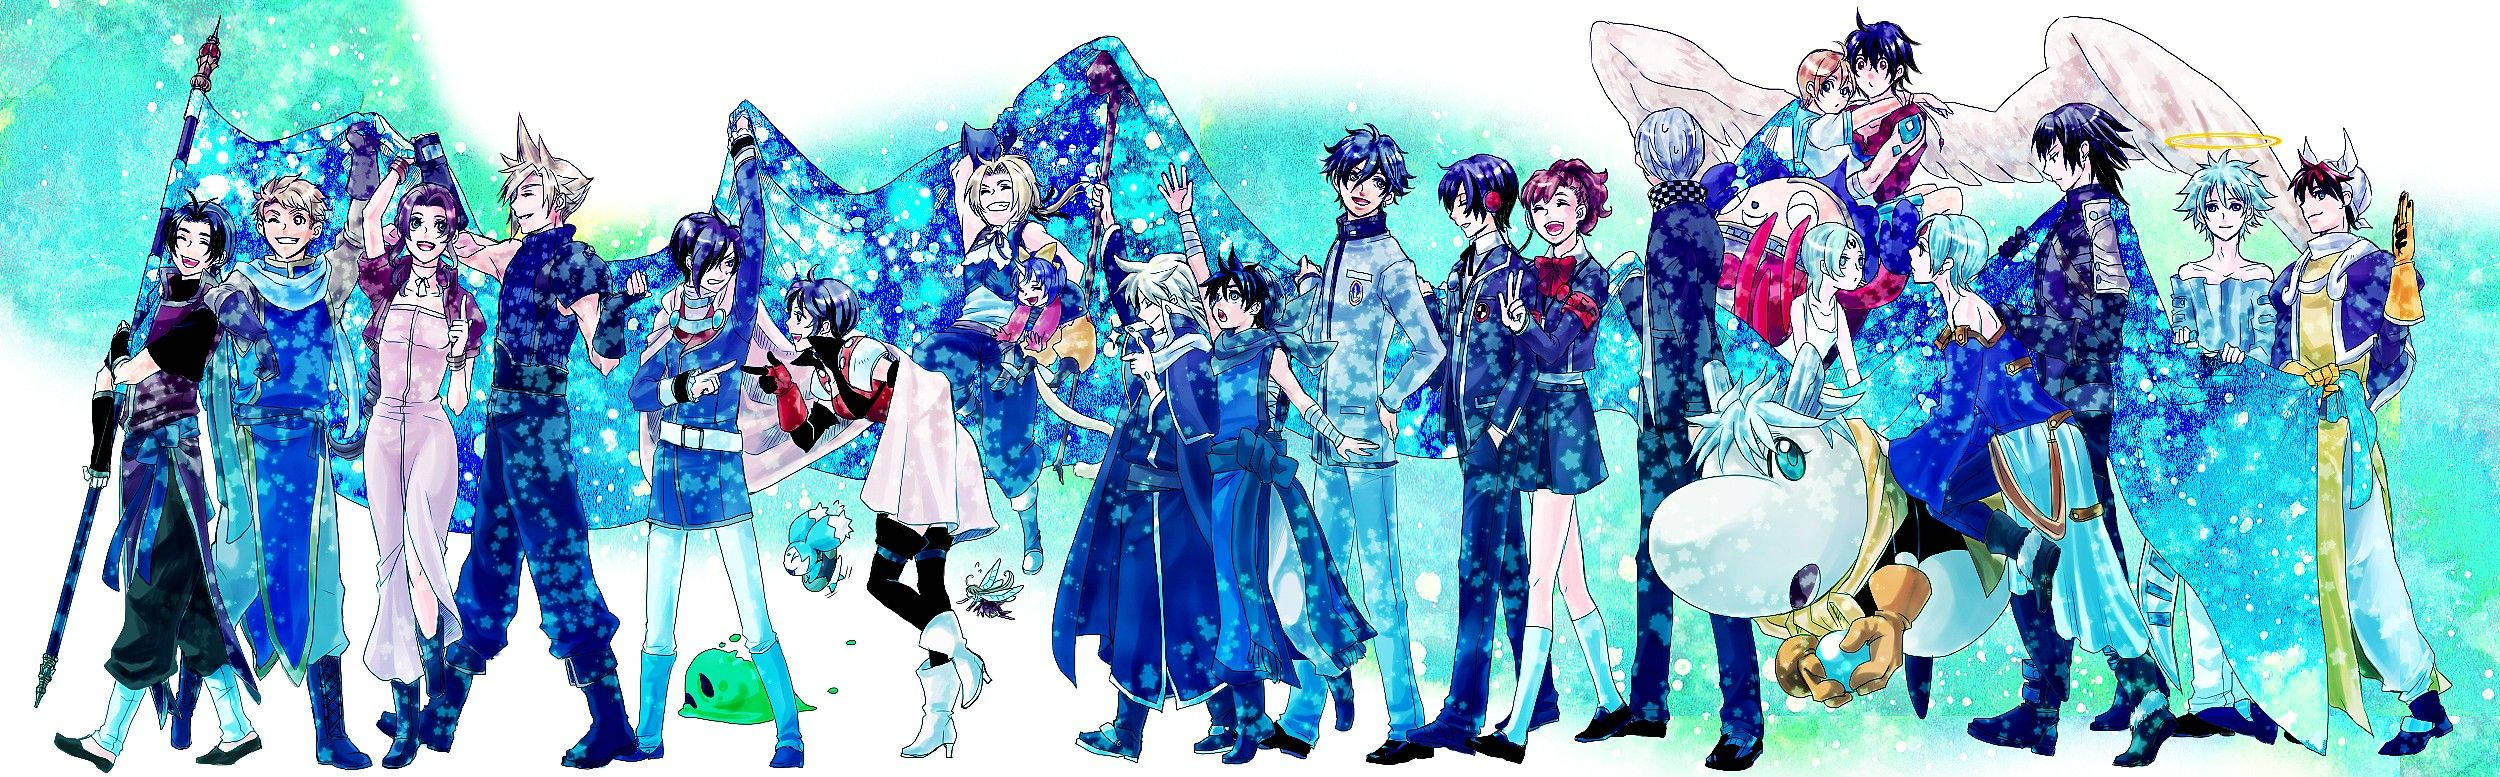 Persona Anime In Blue